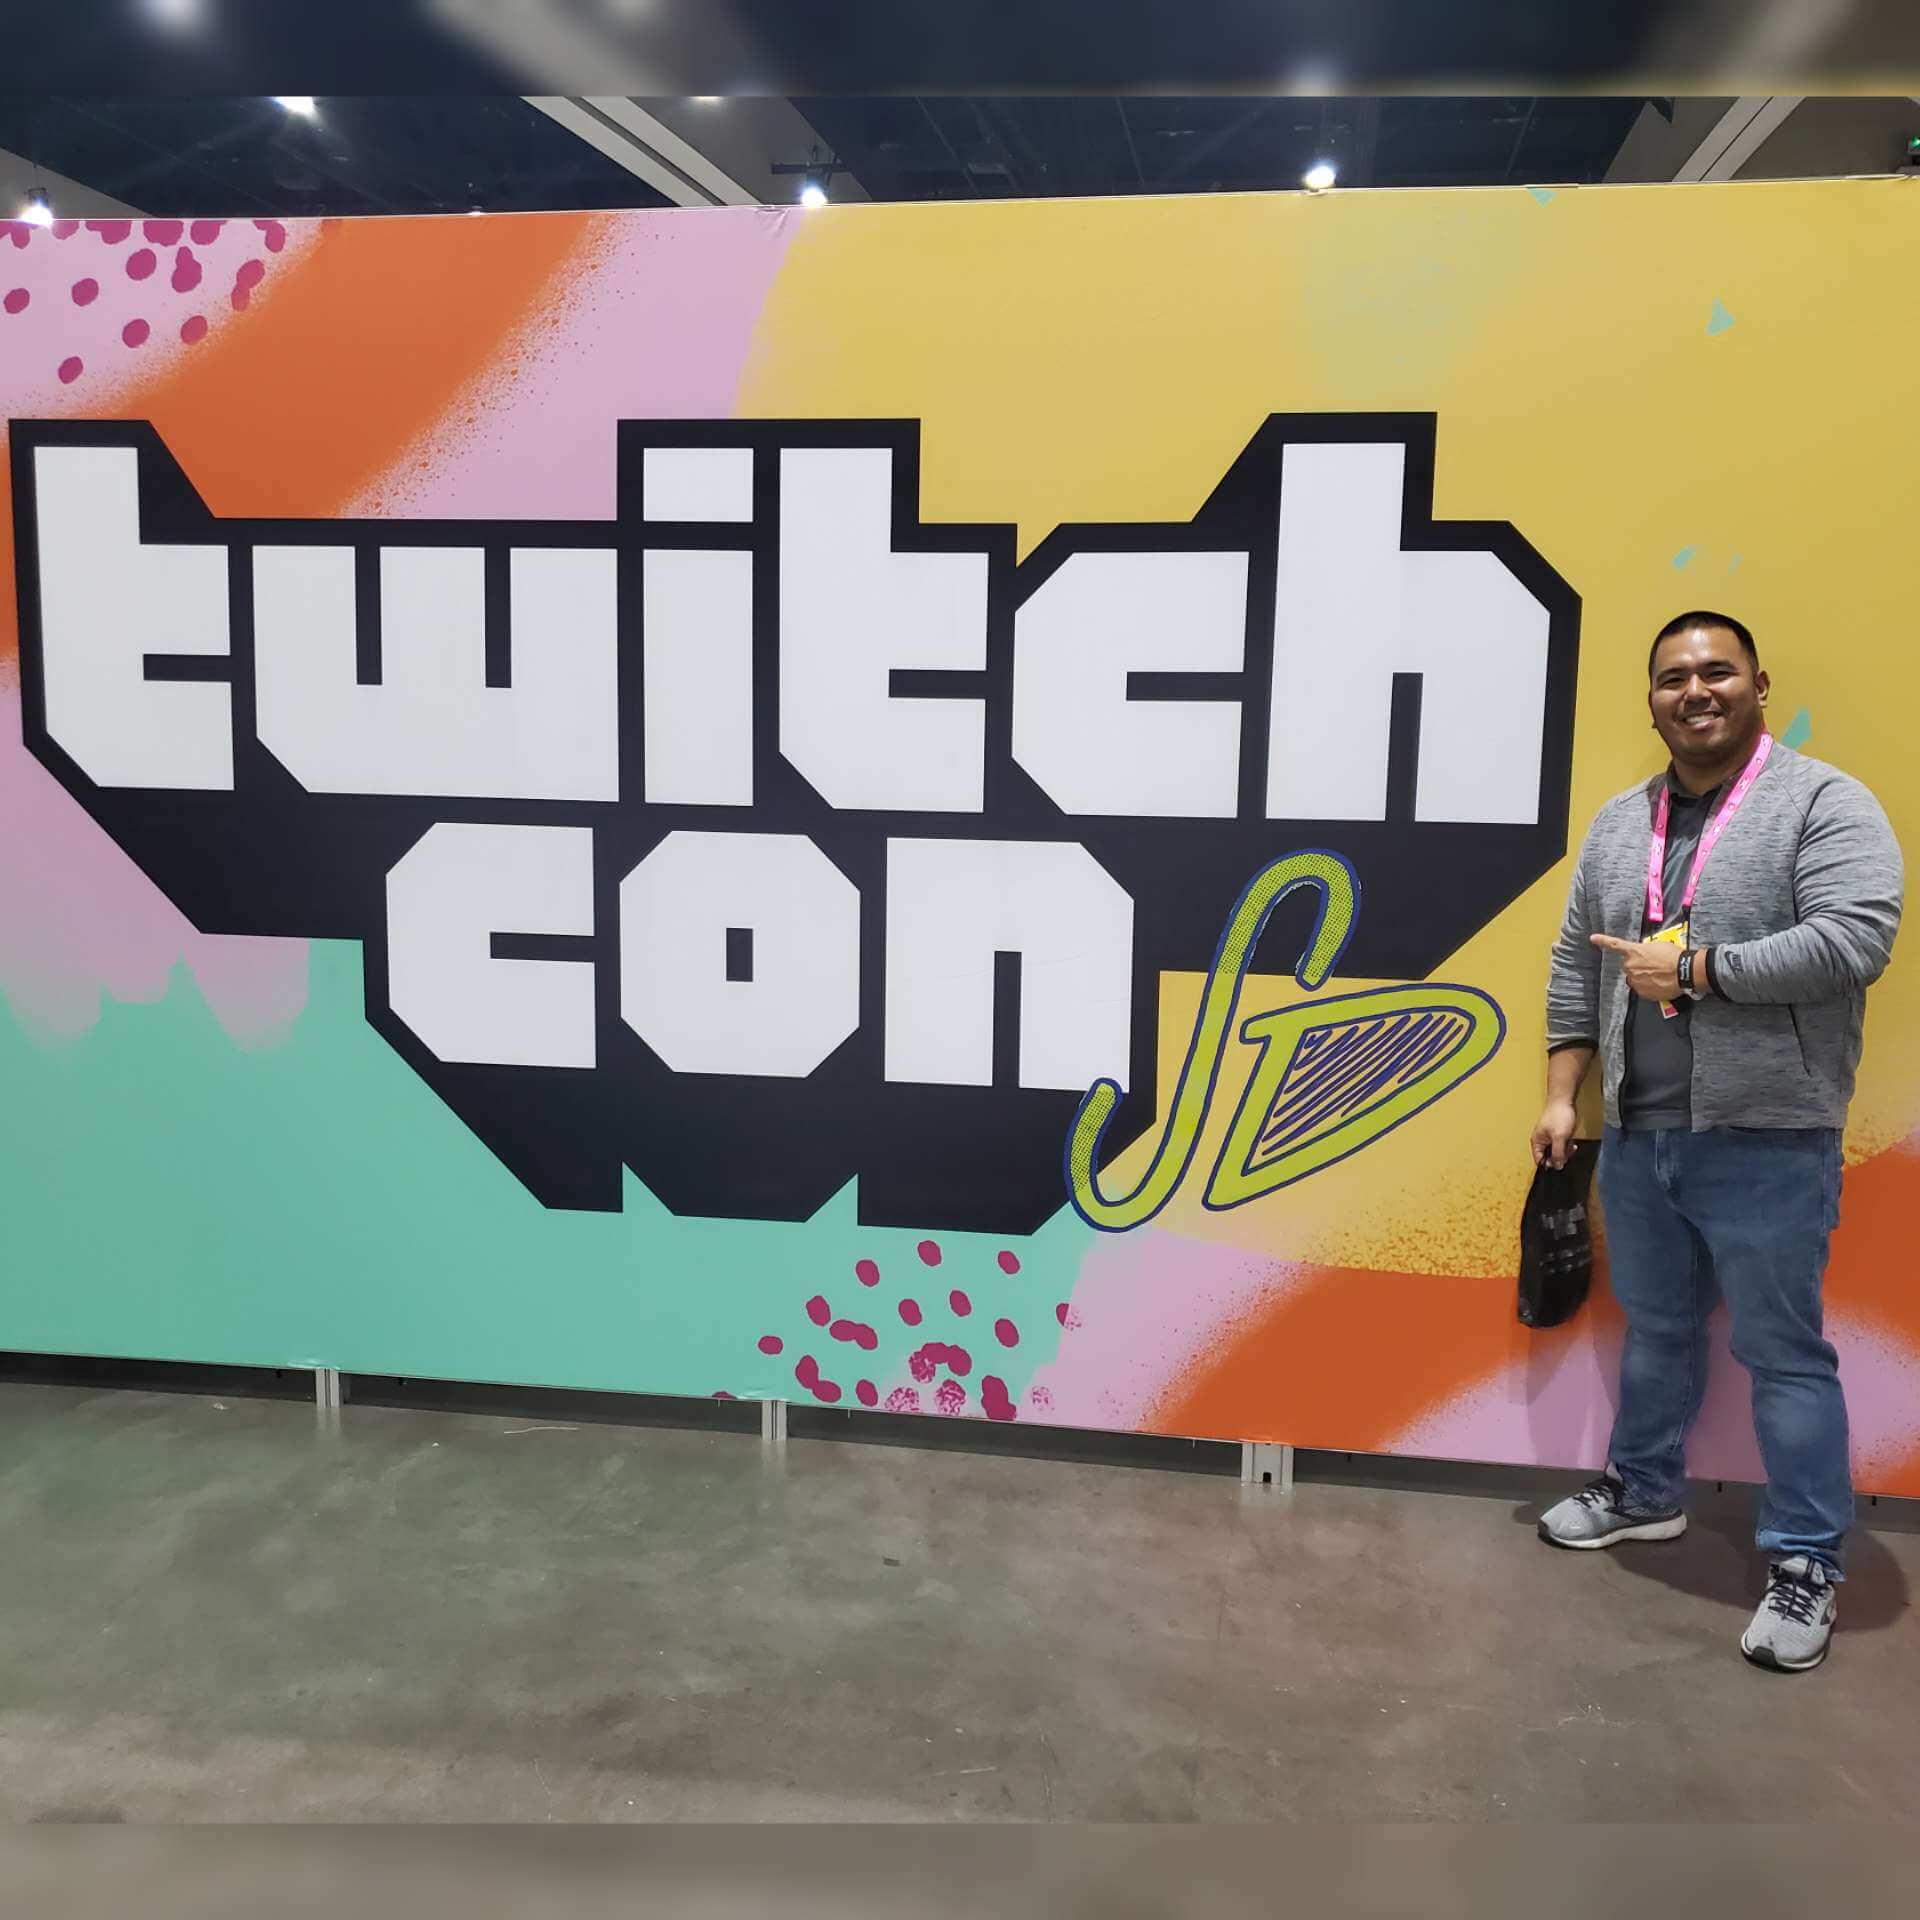 JoeyBolo77 stands in front of a banner for Twitchcon 2022 in San Diego.